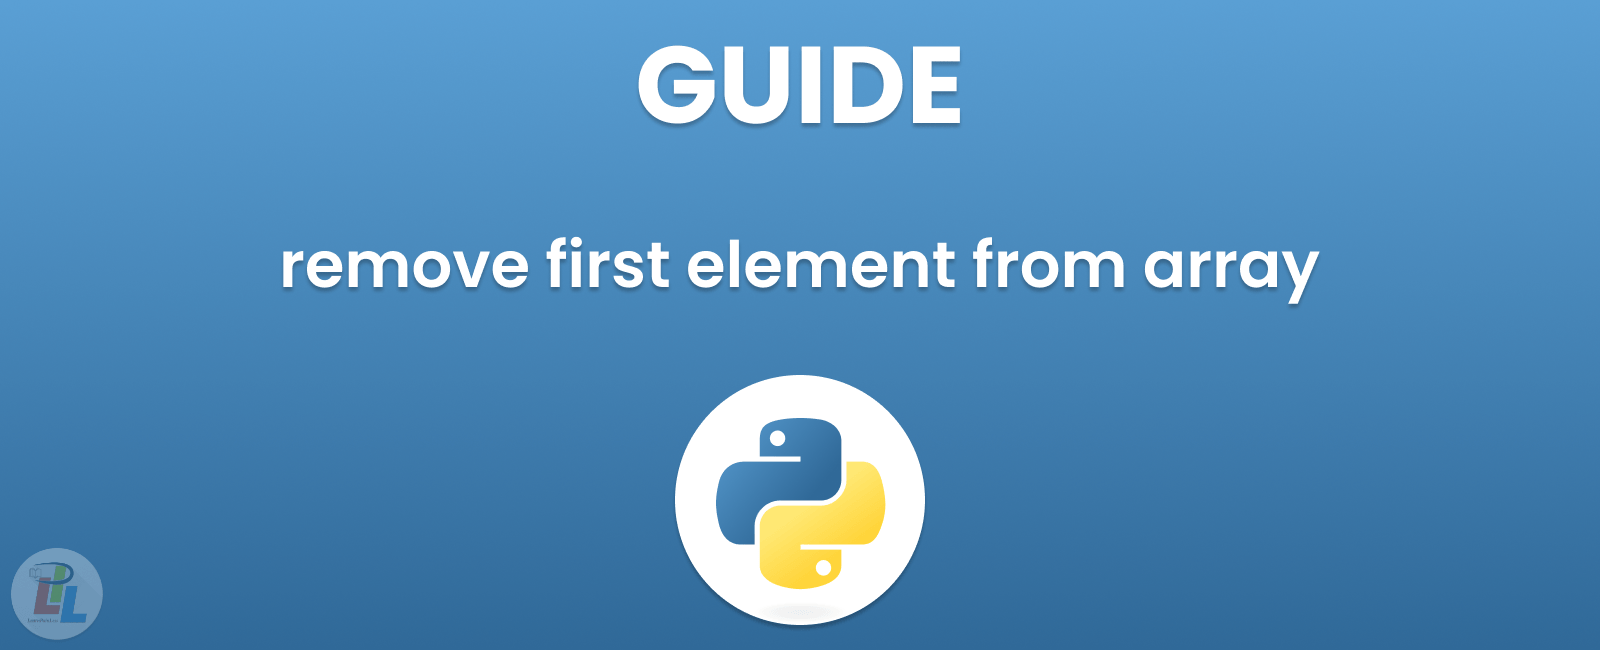 How to remove first element from array in python